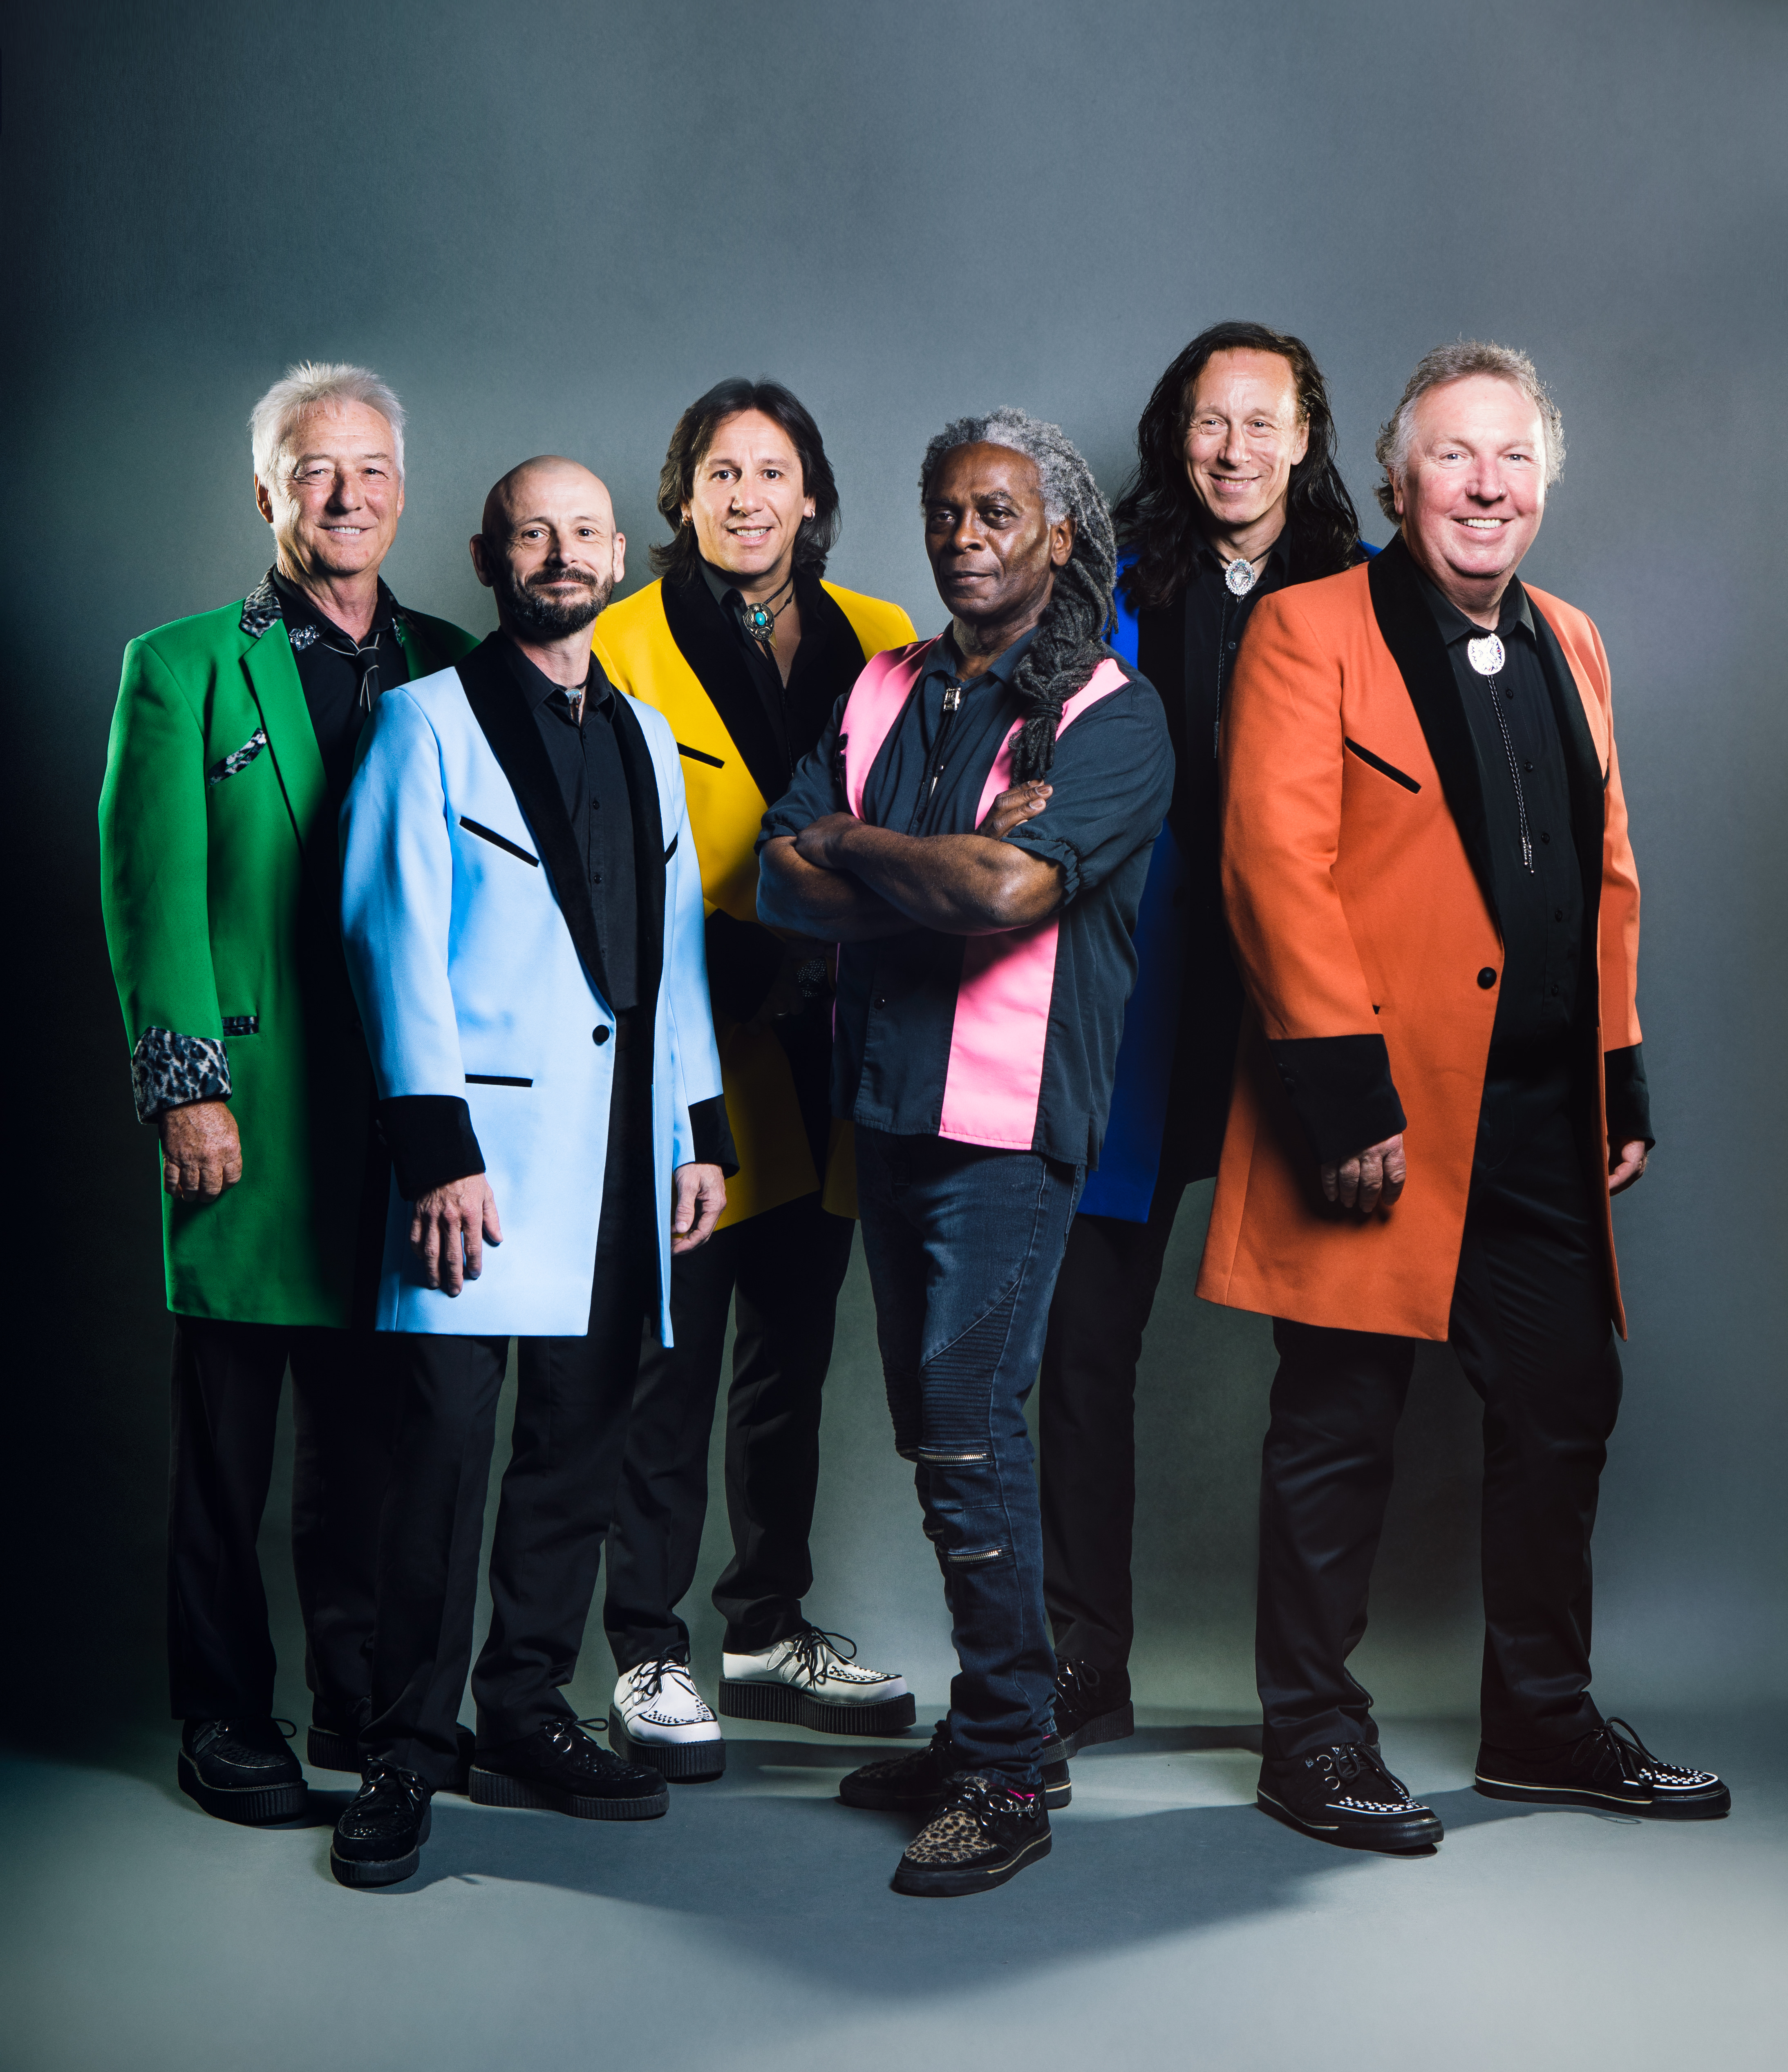 Showaddywaddy is back at the Brindley 🗓